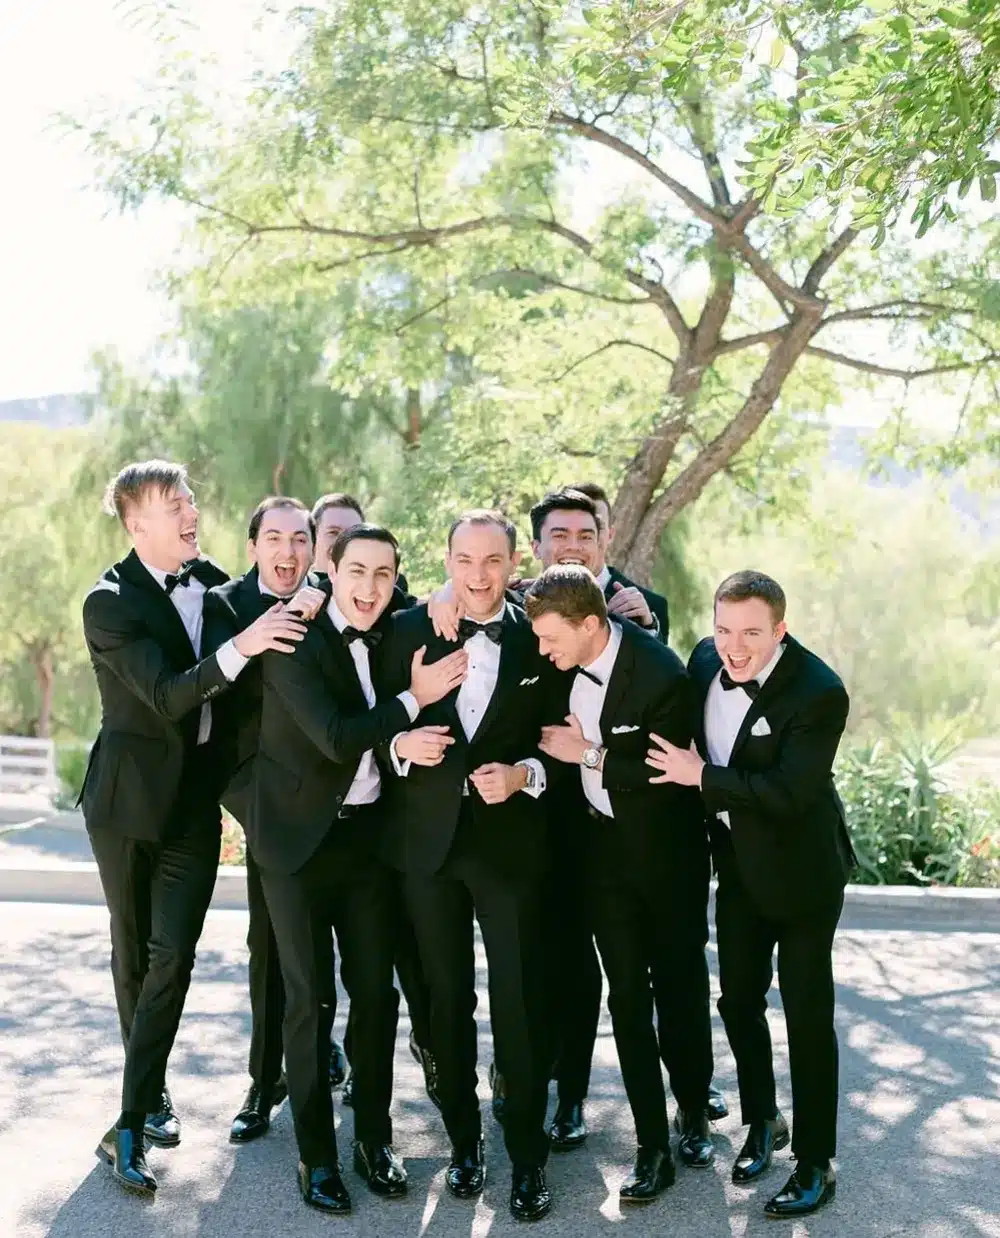 Groom and groomsmen laughing together in matching black suits on the wedding day